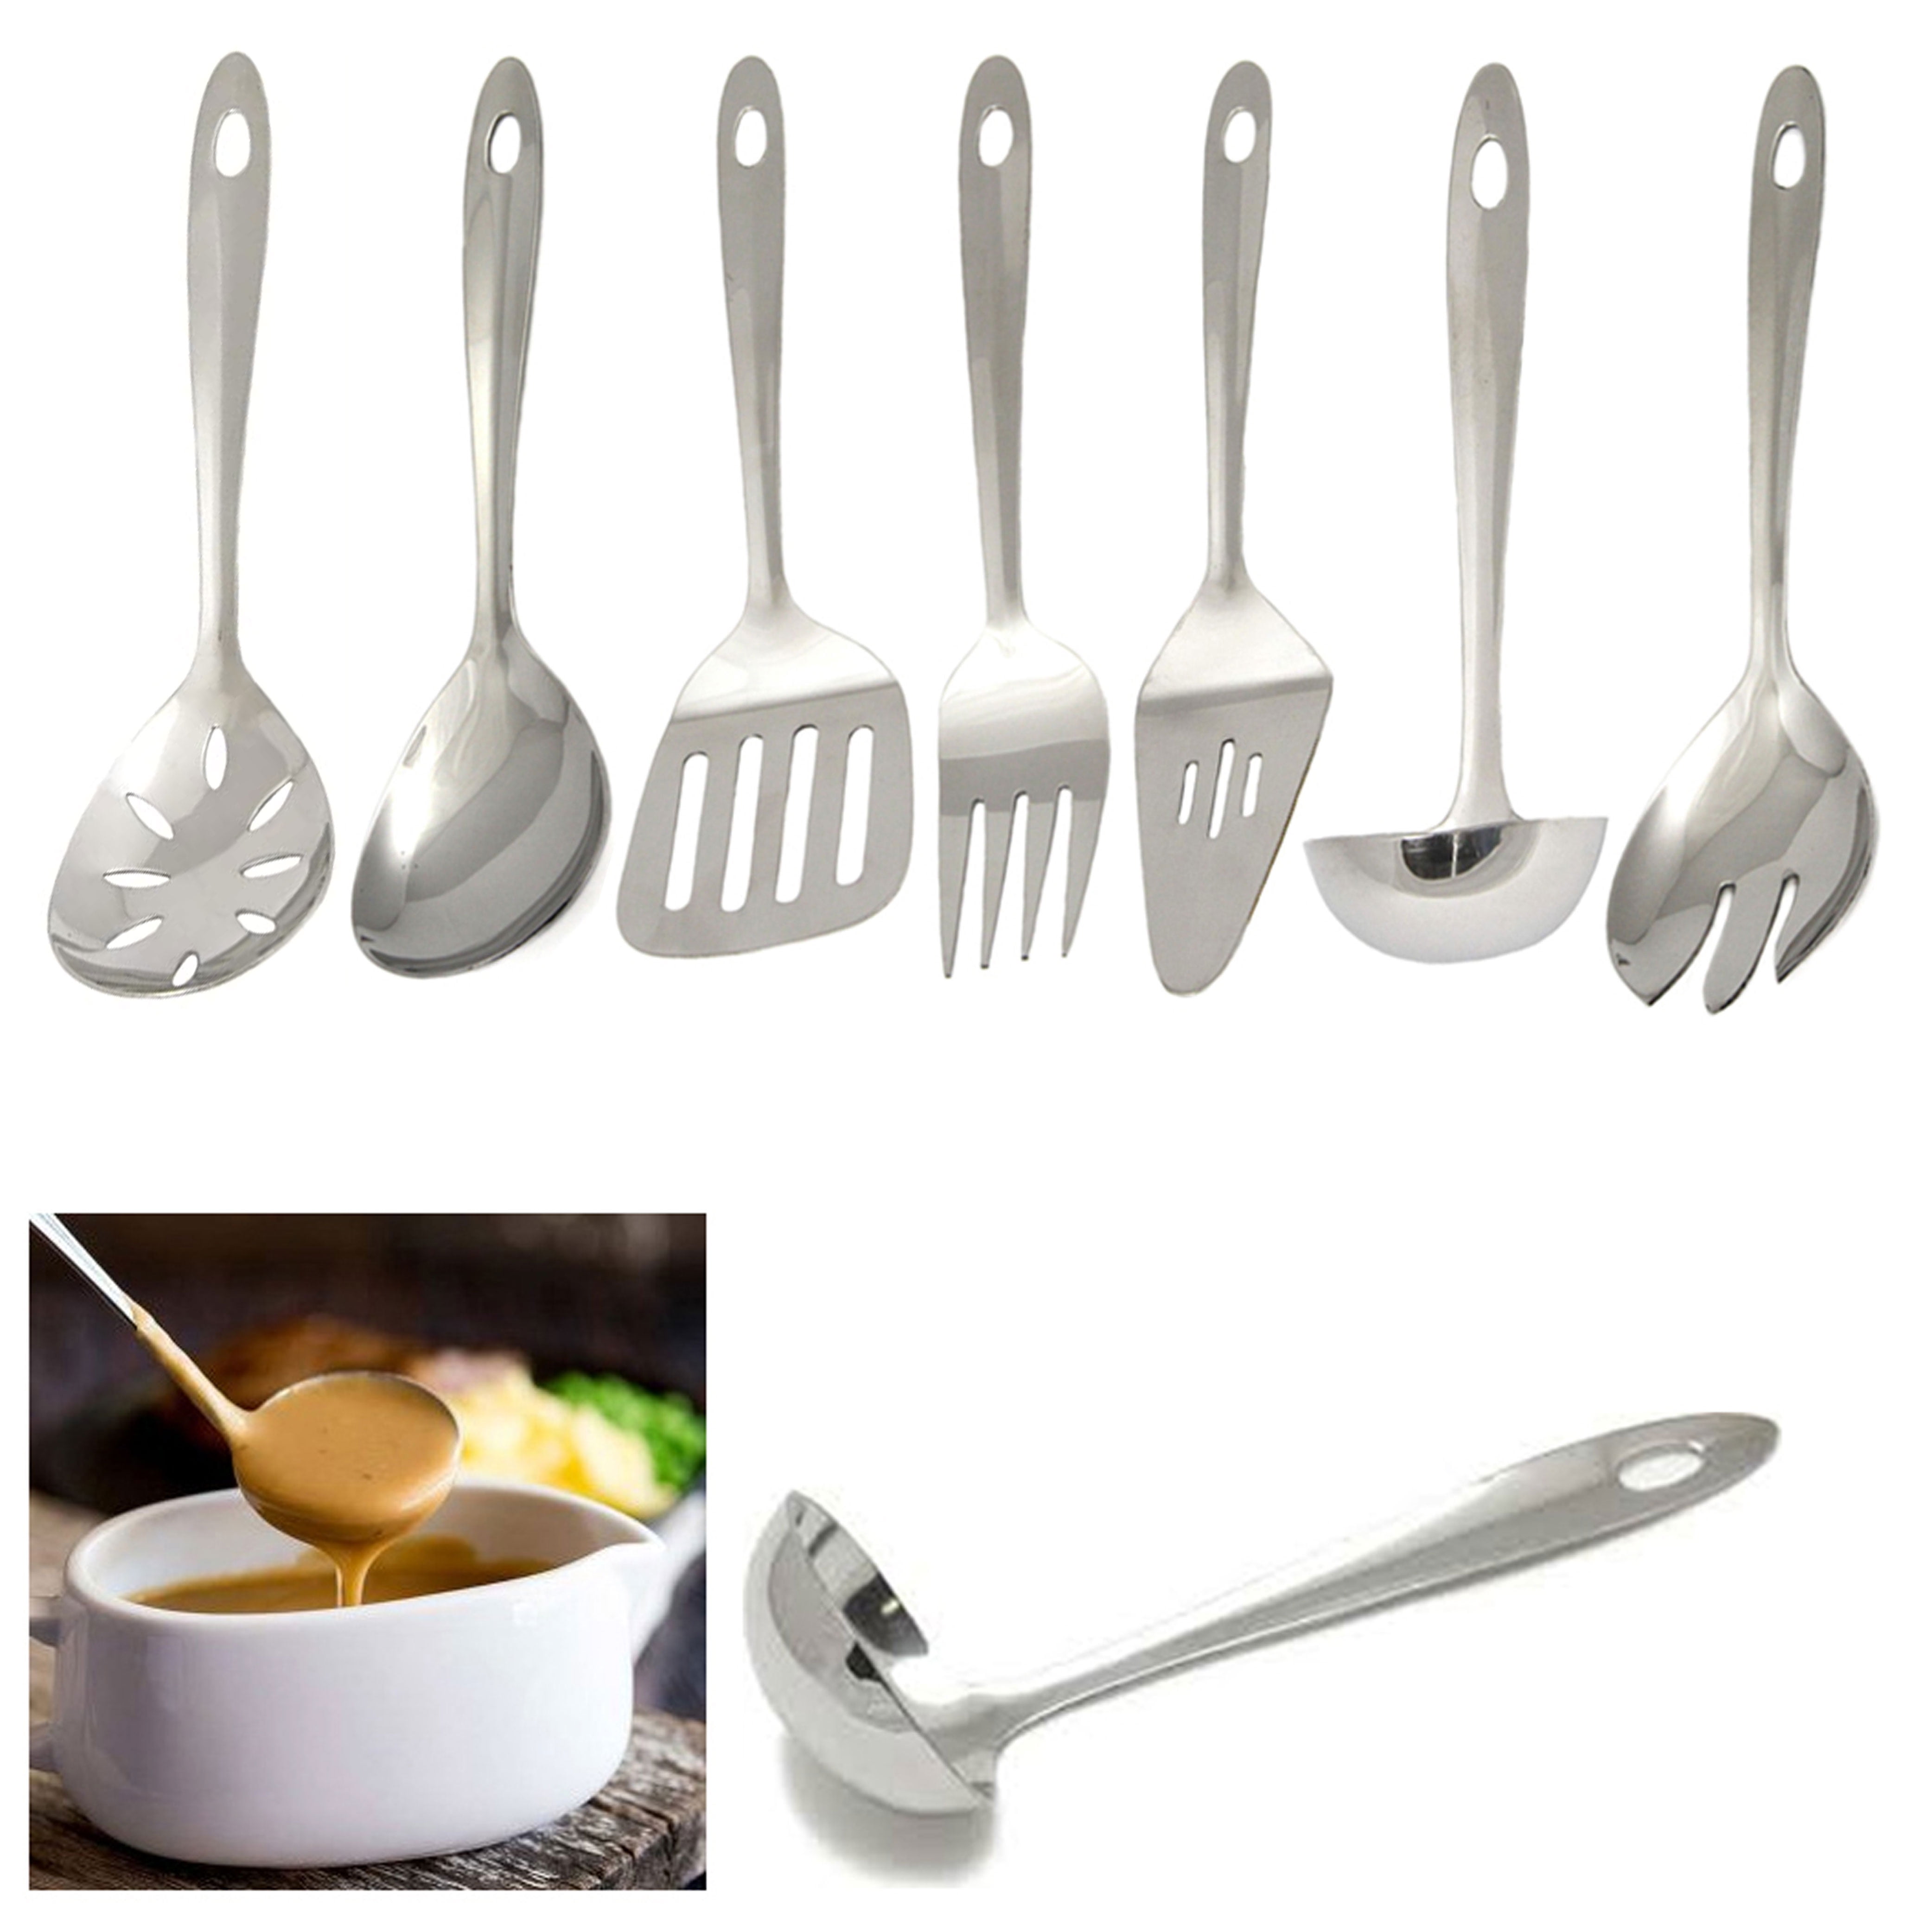 6/7PCS Stainless Steel Cooking Utensils Set Non-stick Spatula